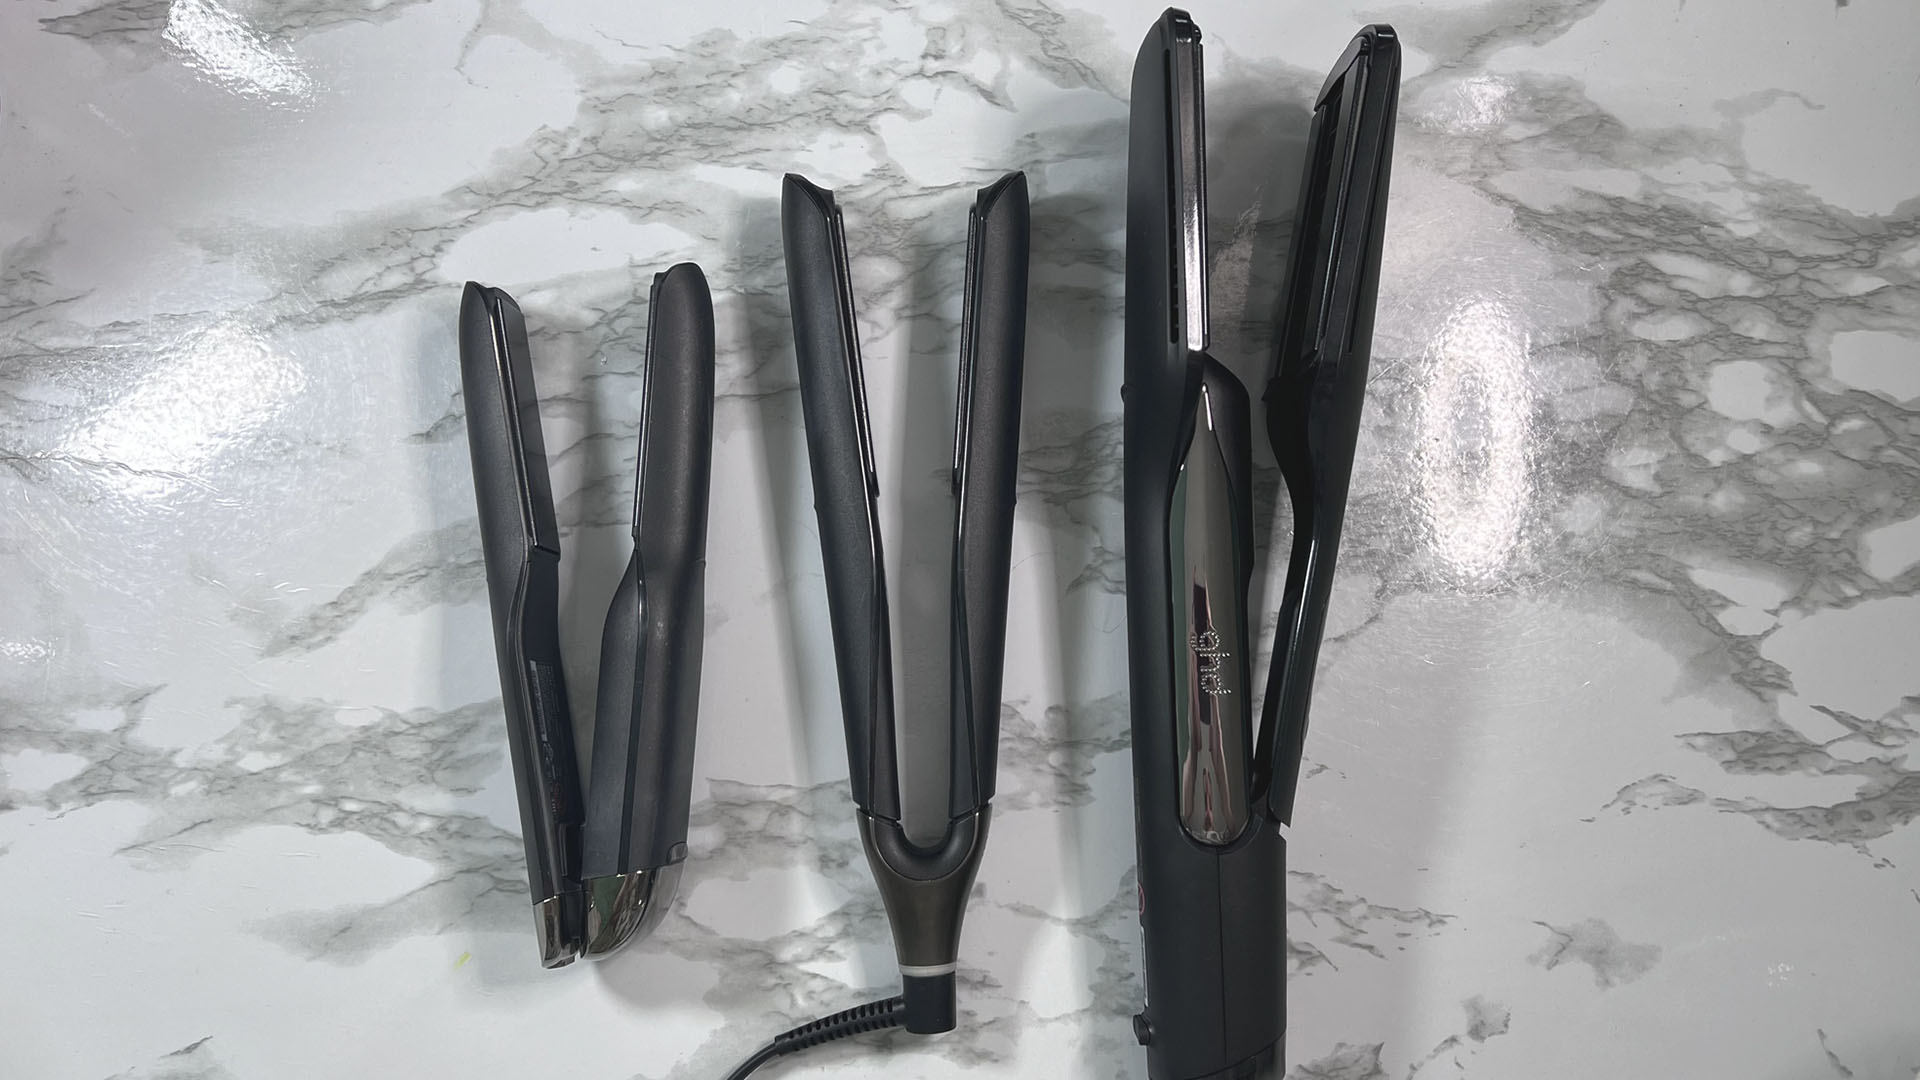 GHD Duet Style hair styler with other GHD stylers to show how the sizes compare